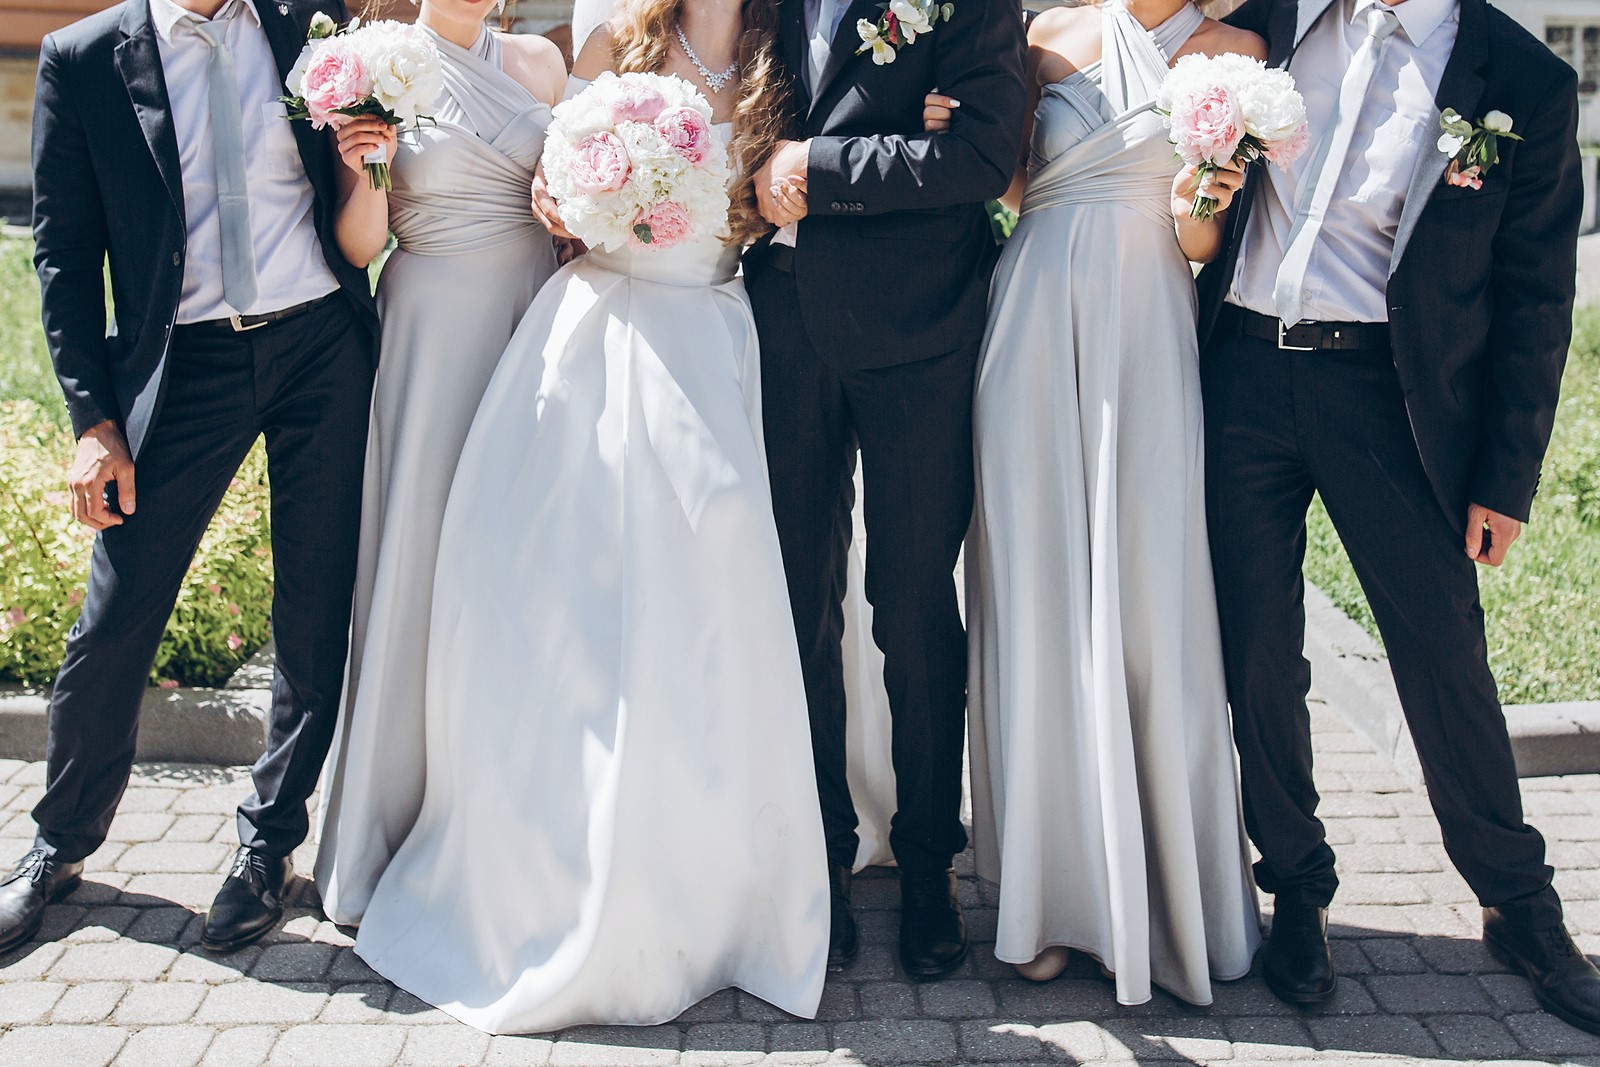 4 Tips to Dress Your Groomsmen Easily with Class and Style